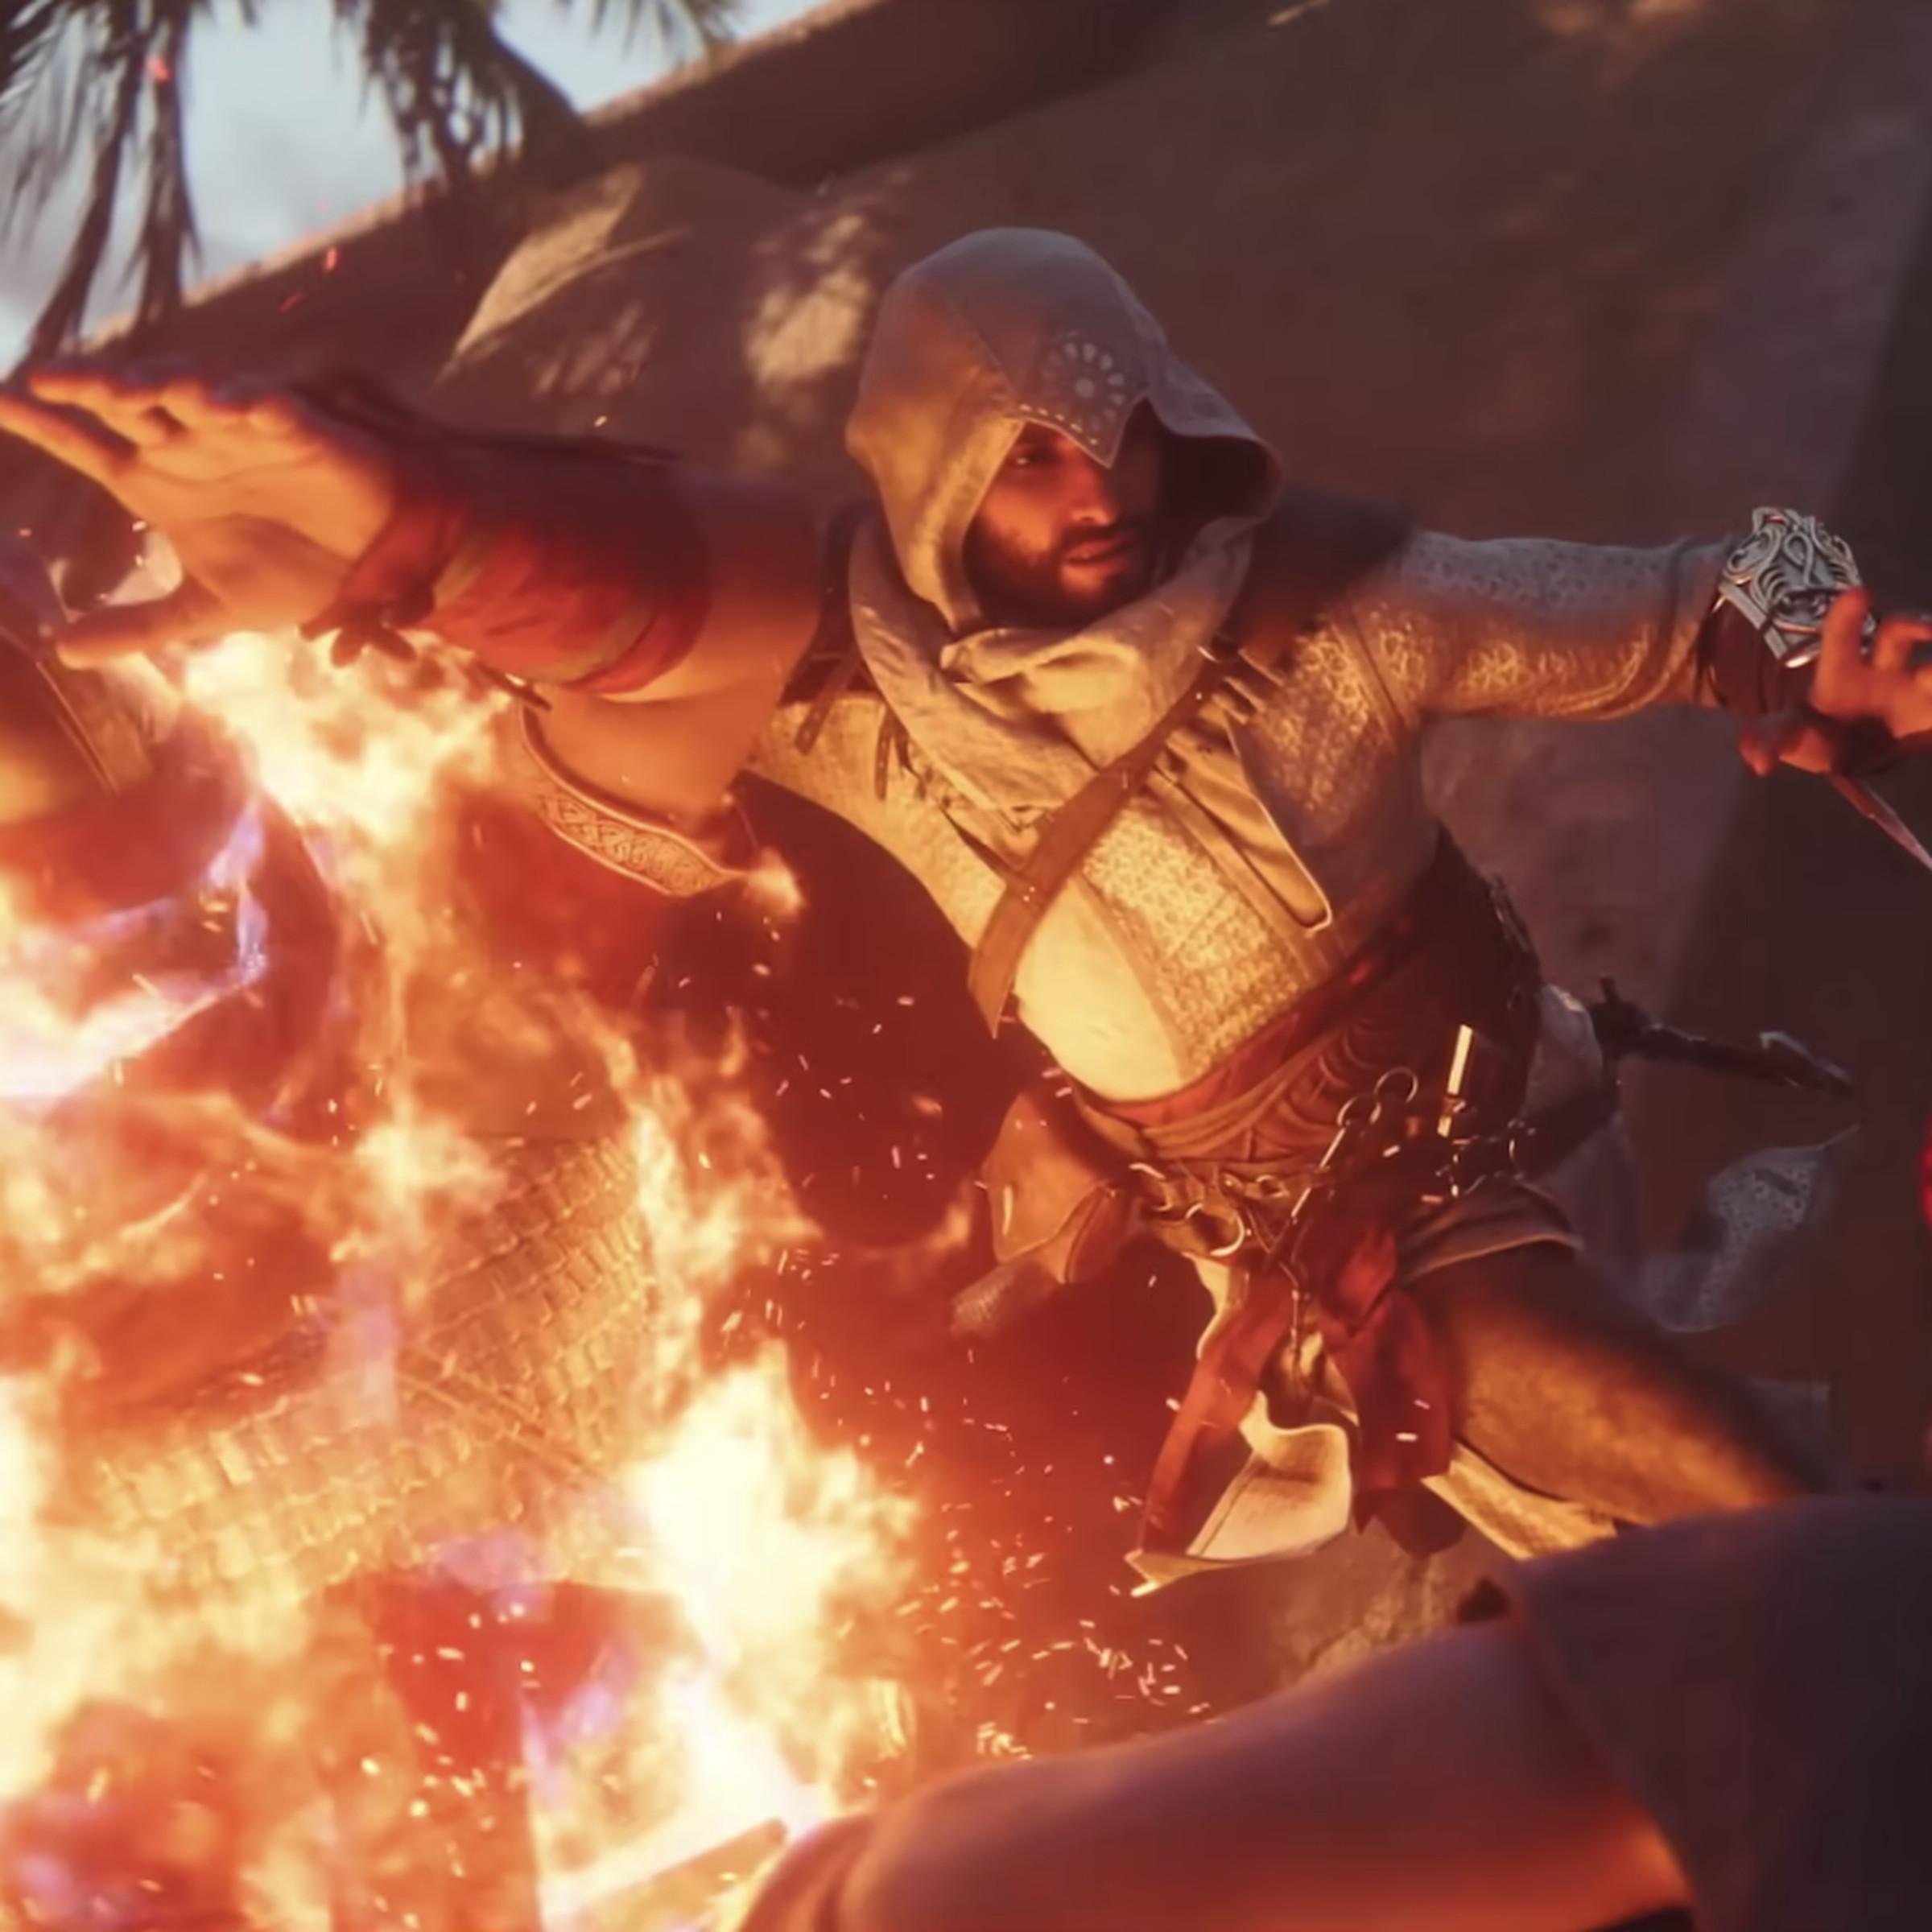 Screenshot from Assassin’s Creed Mirage cinematic trailer featuring Basim assassinating a target while wreathed in flames.